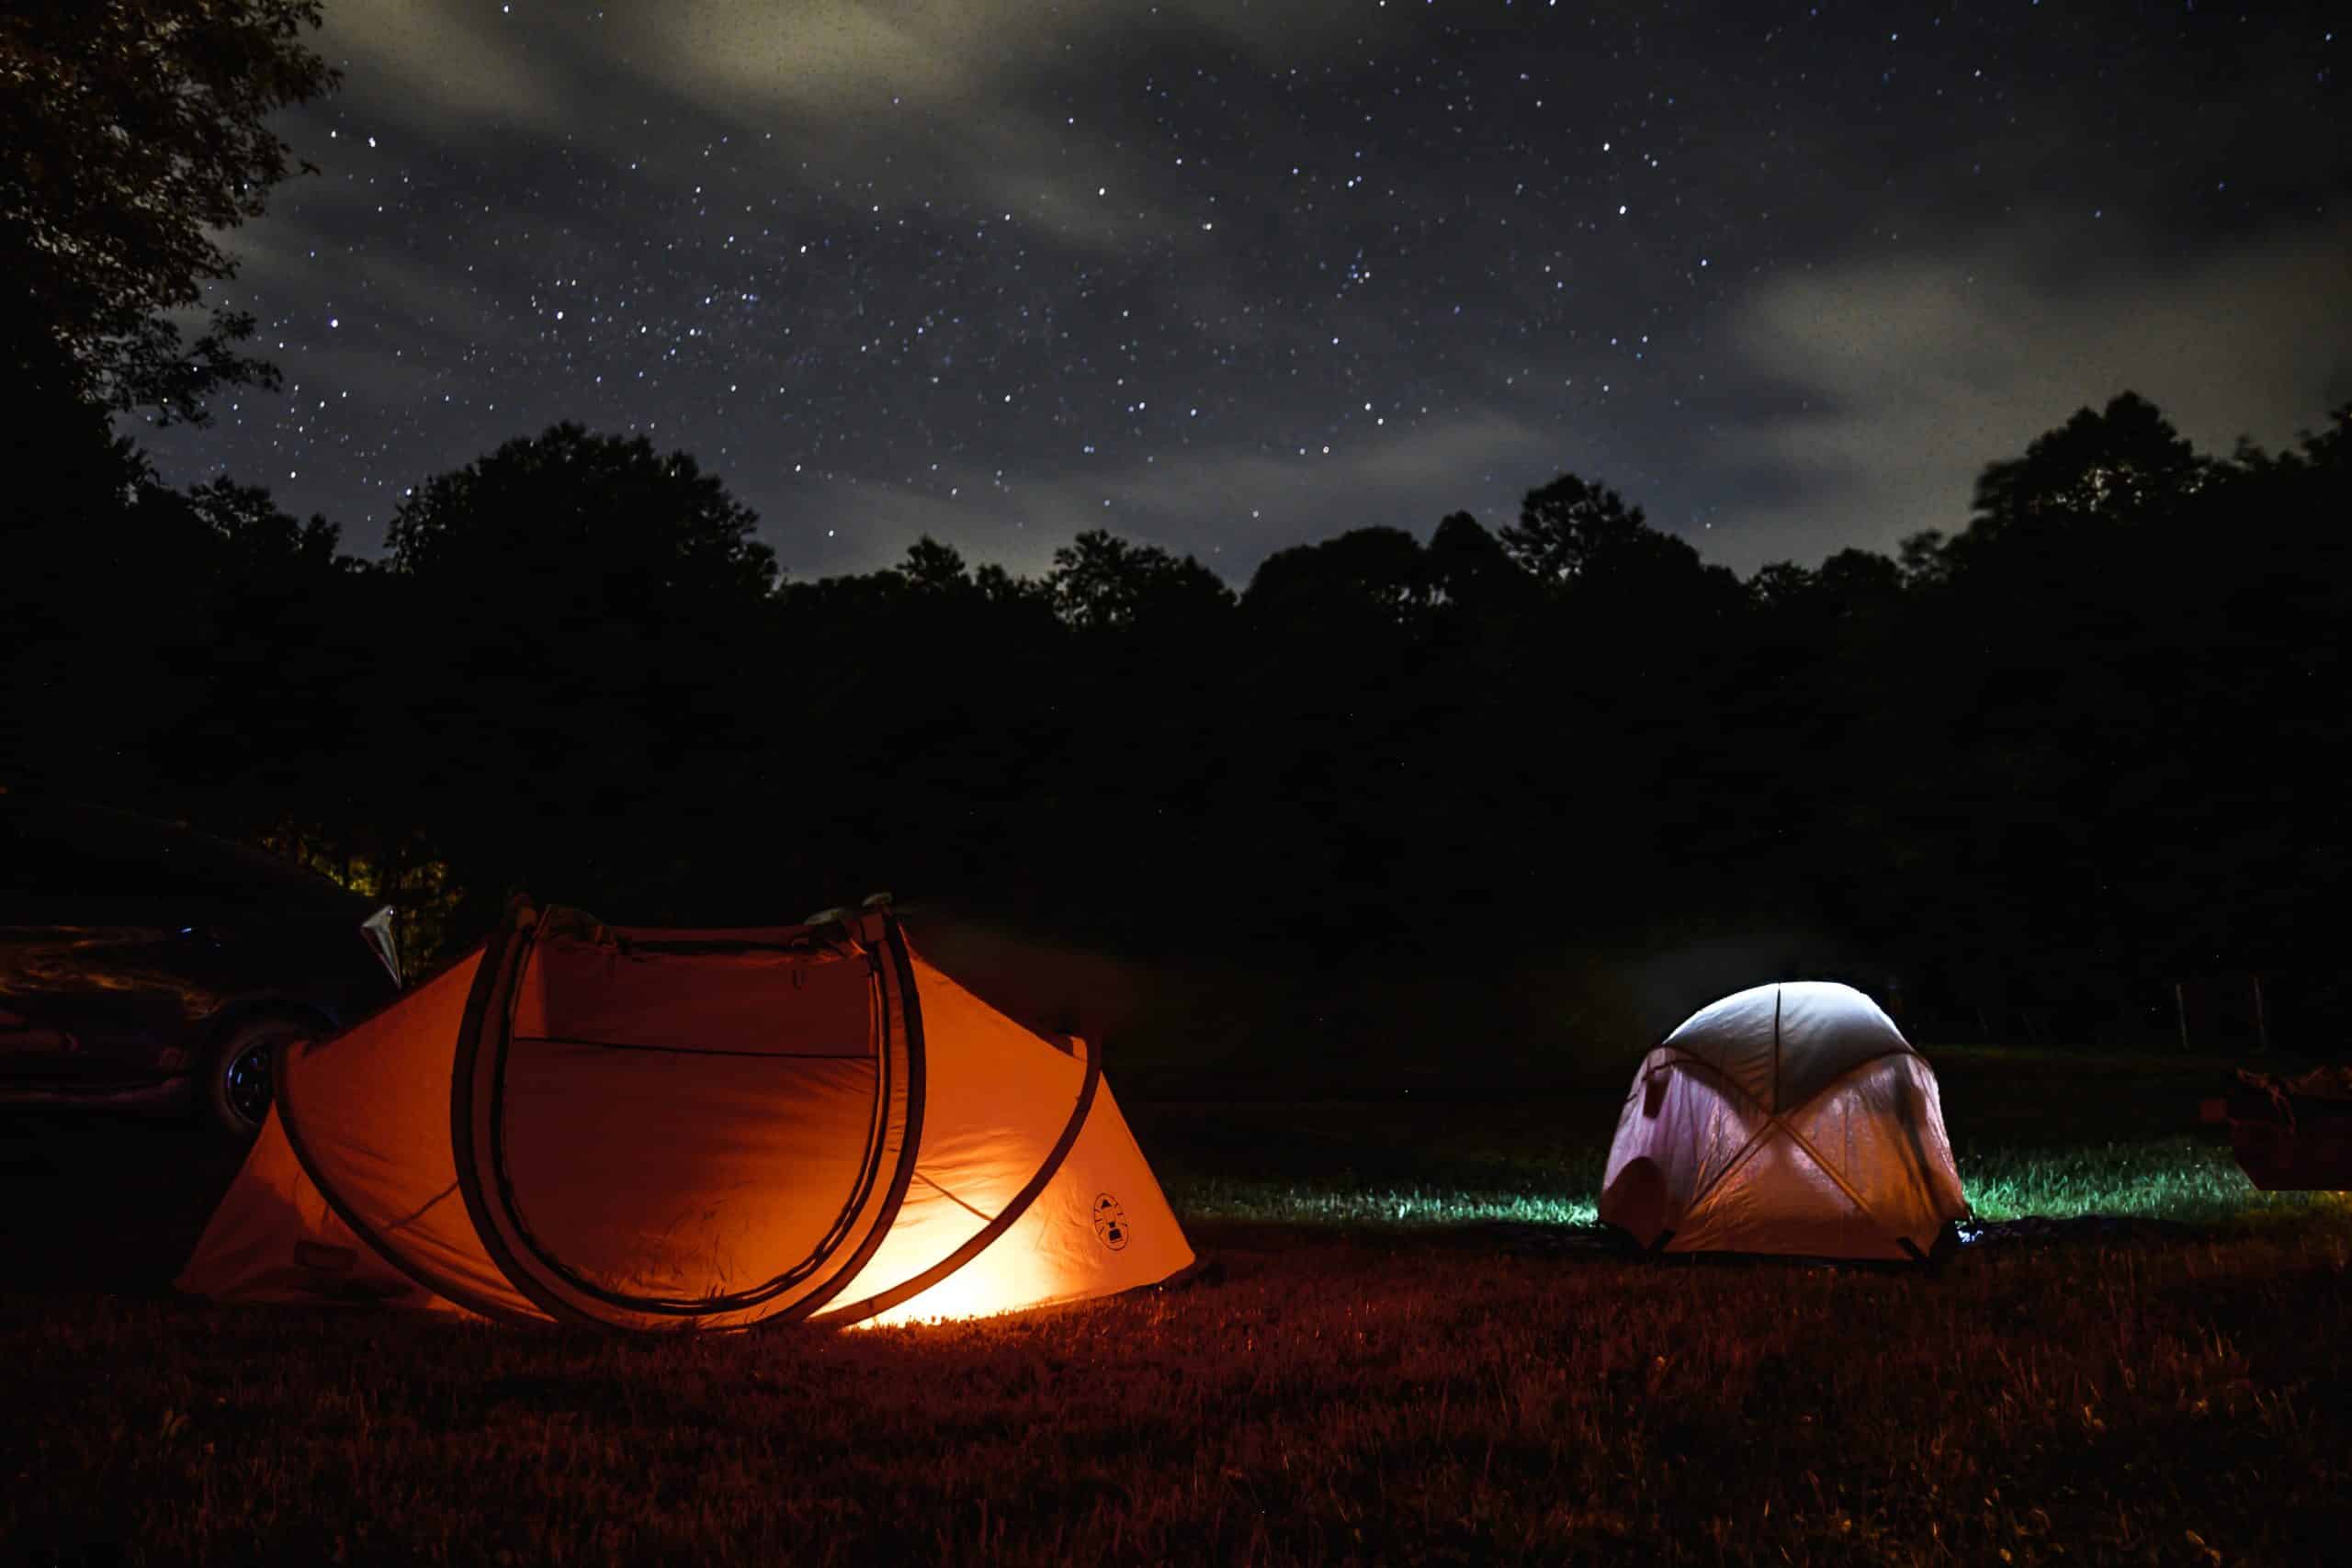 Two lighted tents at night. Above is a starry night sky